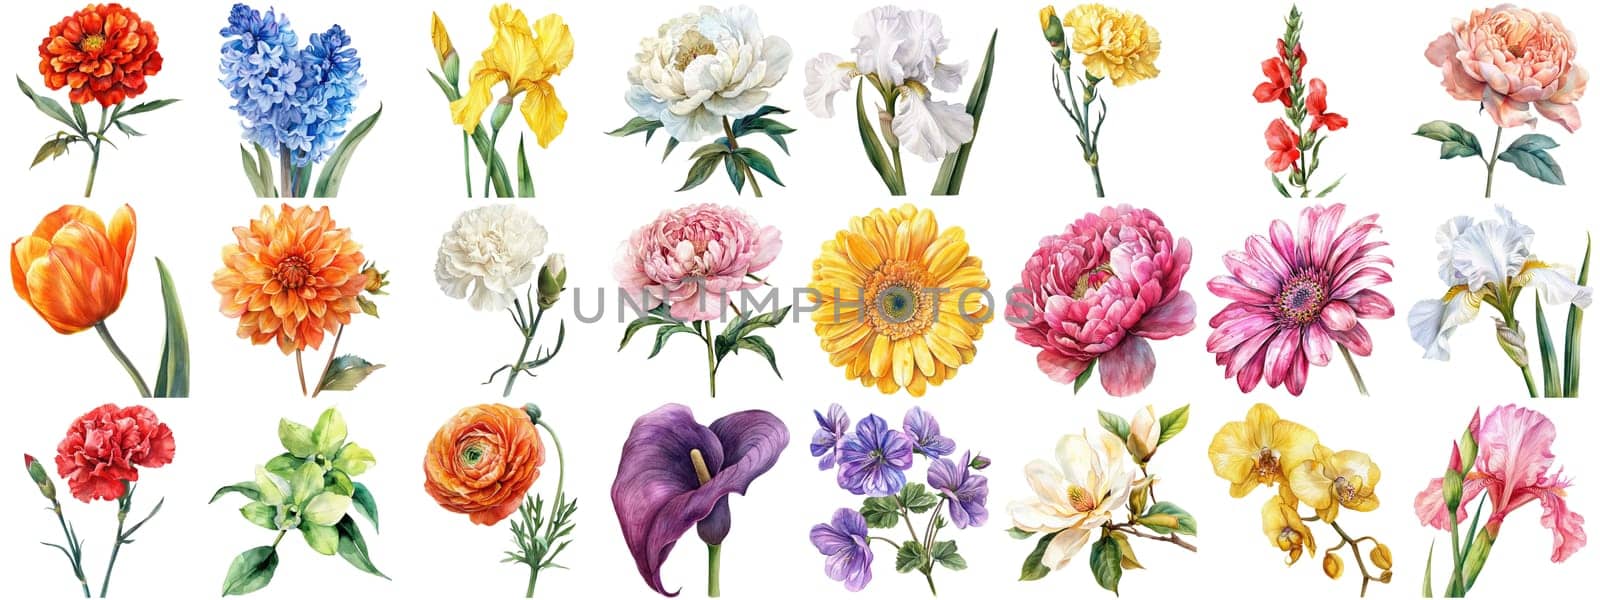 Watercolor flower set isolated background. Various floral collection crisp edges by biancoblue